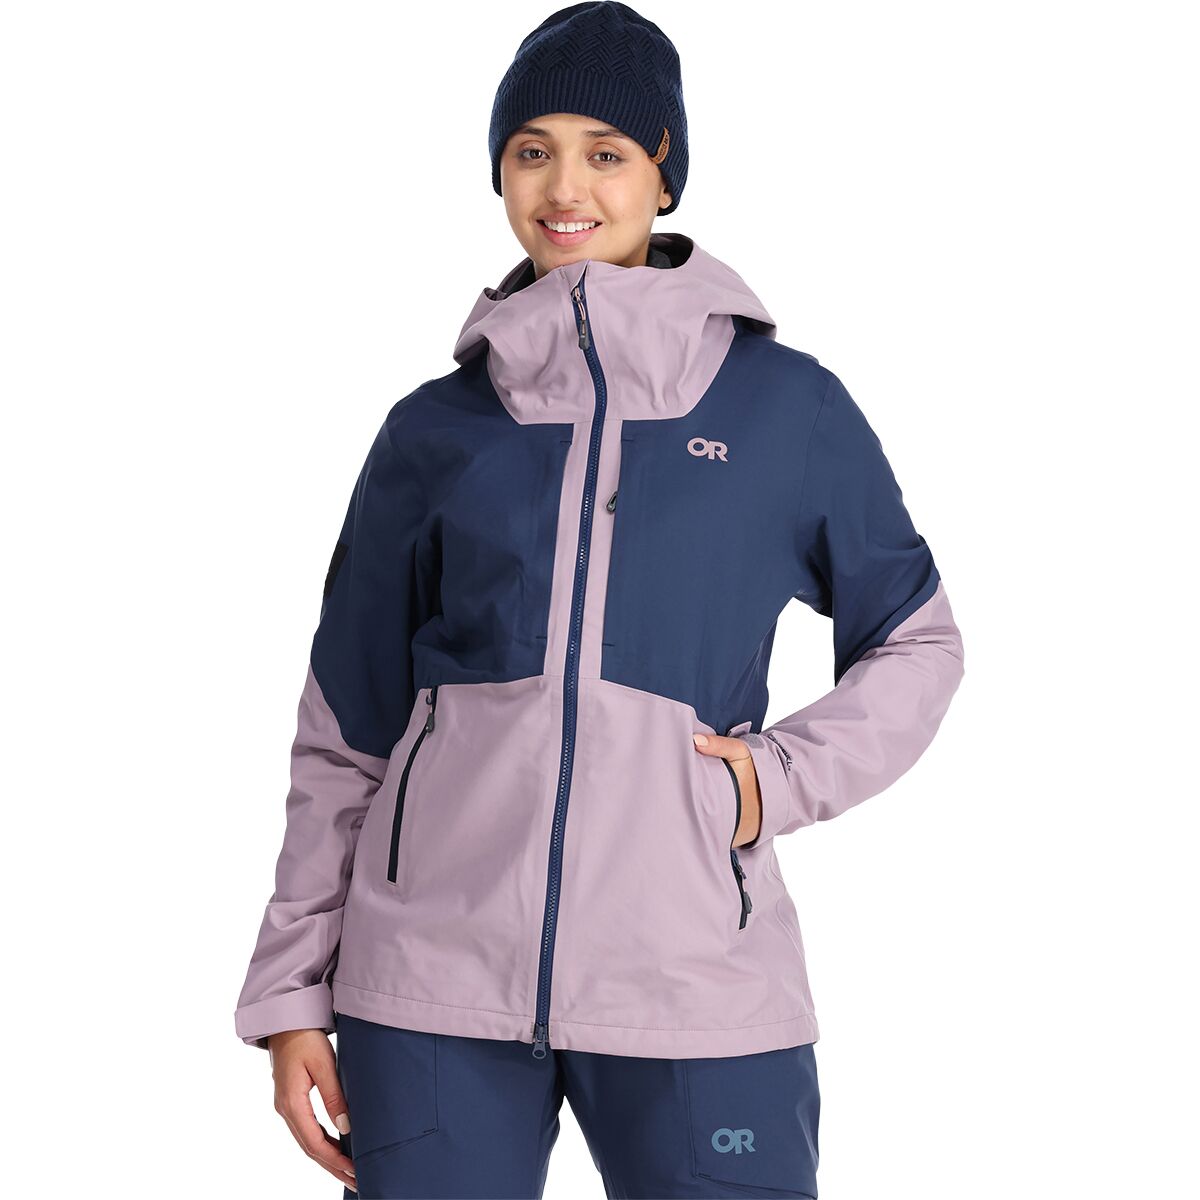 Outdoor Research Skytour AscentShell Jacket - Women's Moth/Naval Blue